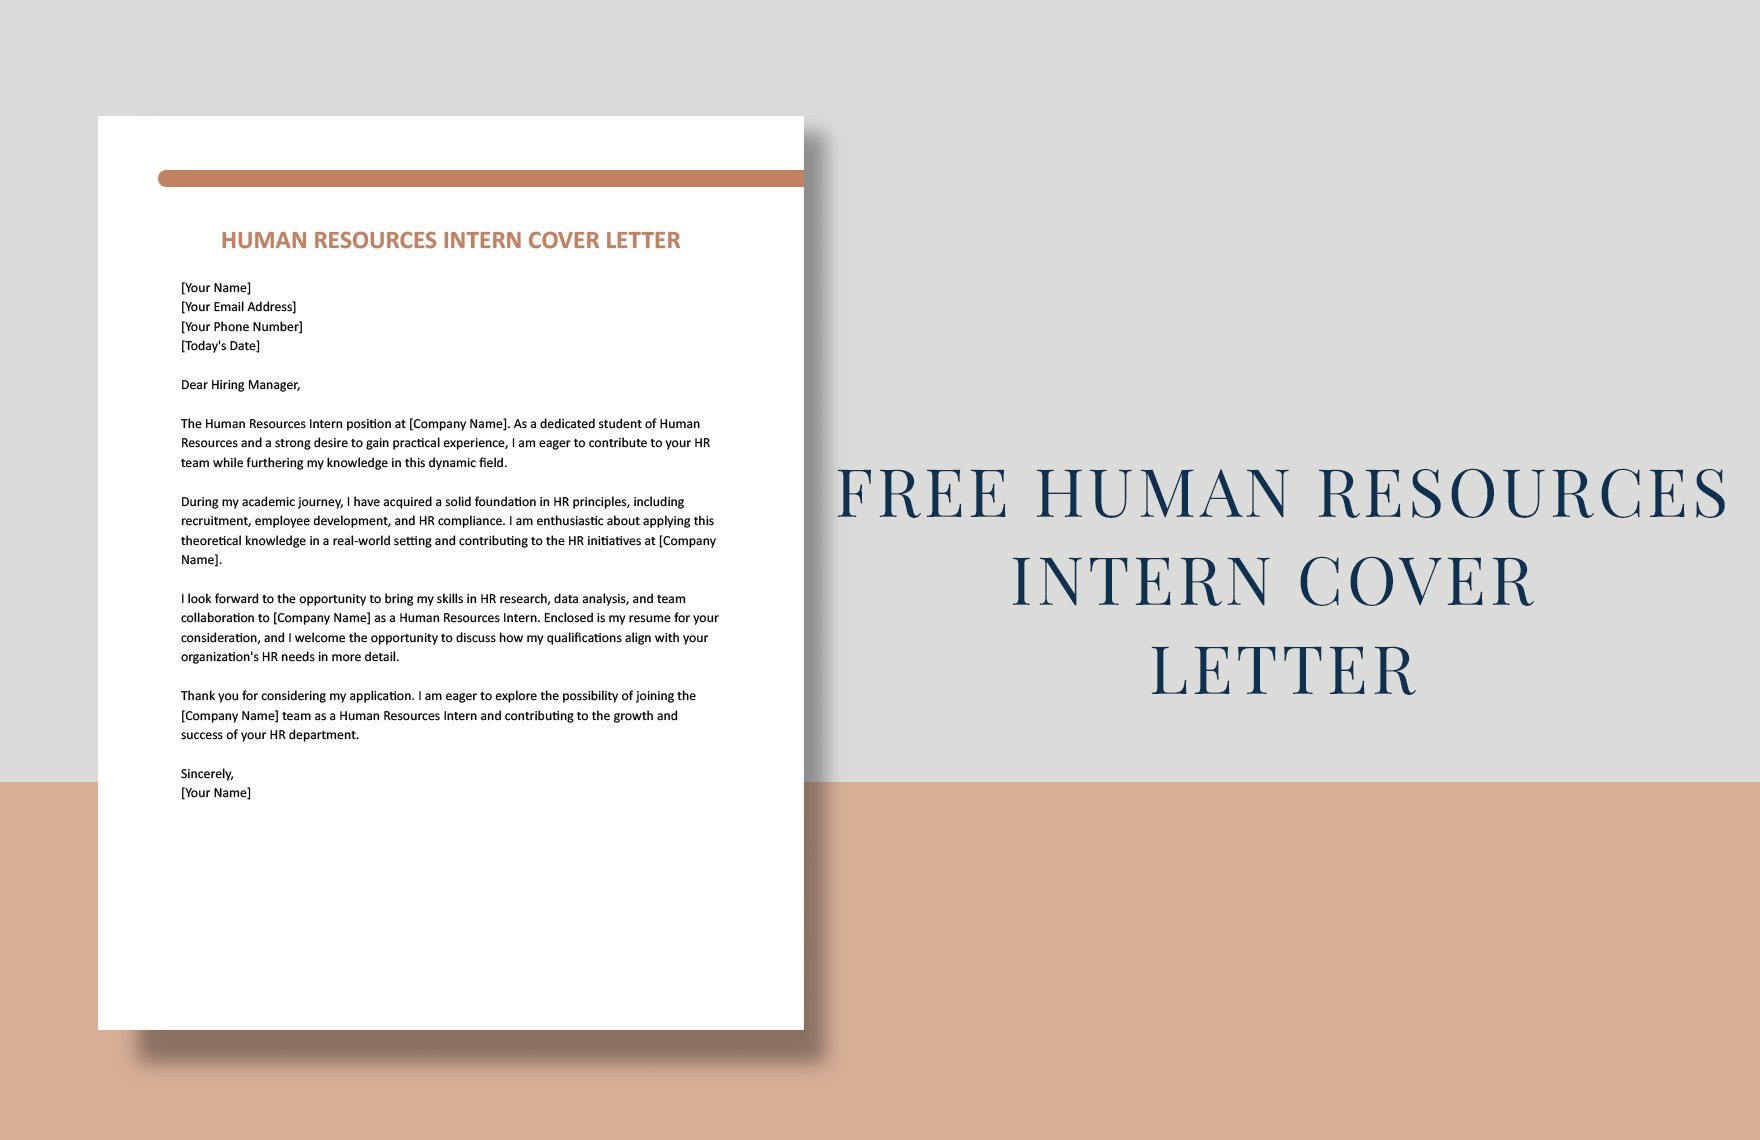 Human Resources Intern Cover Letter in Word, Google Docs